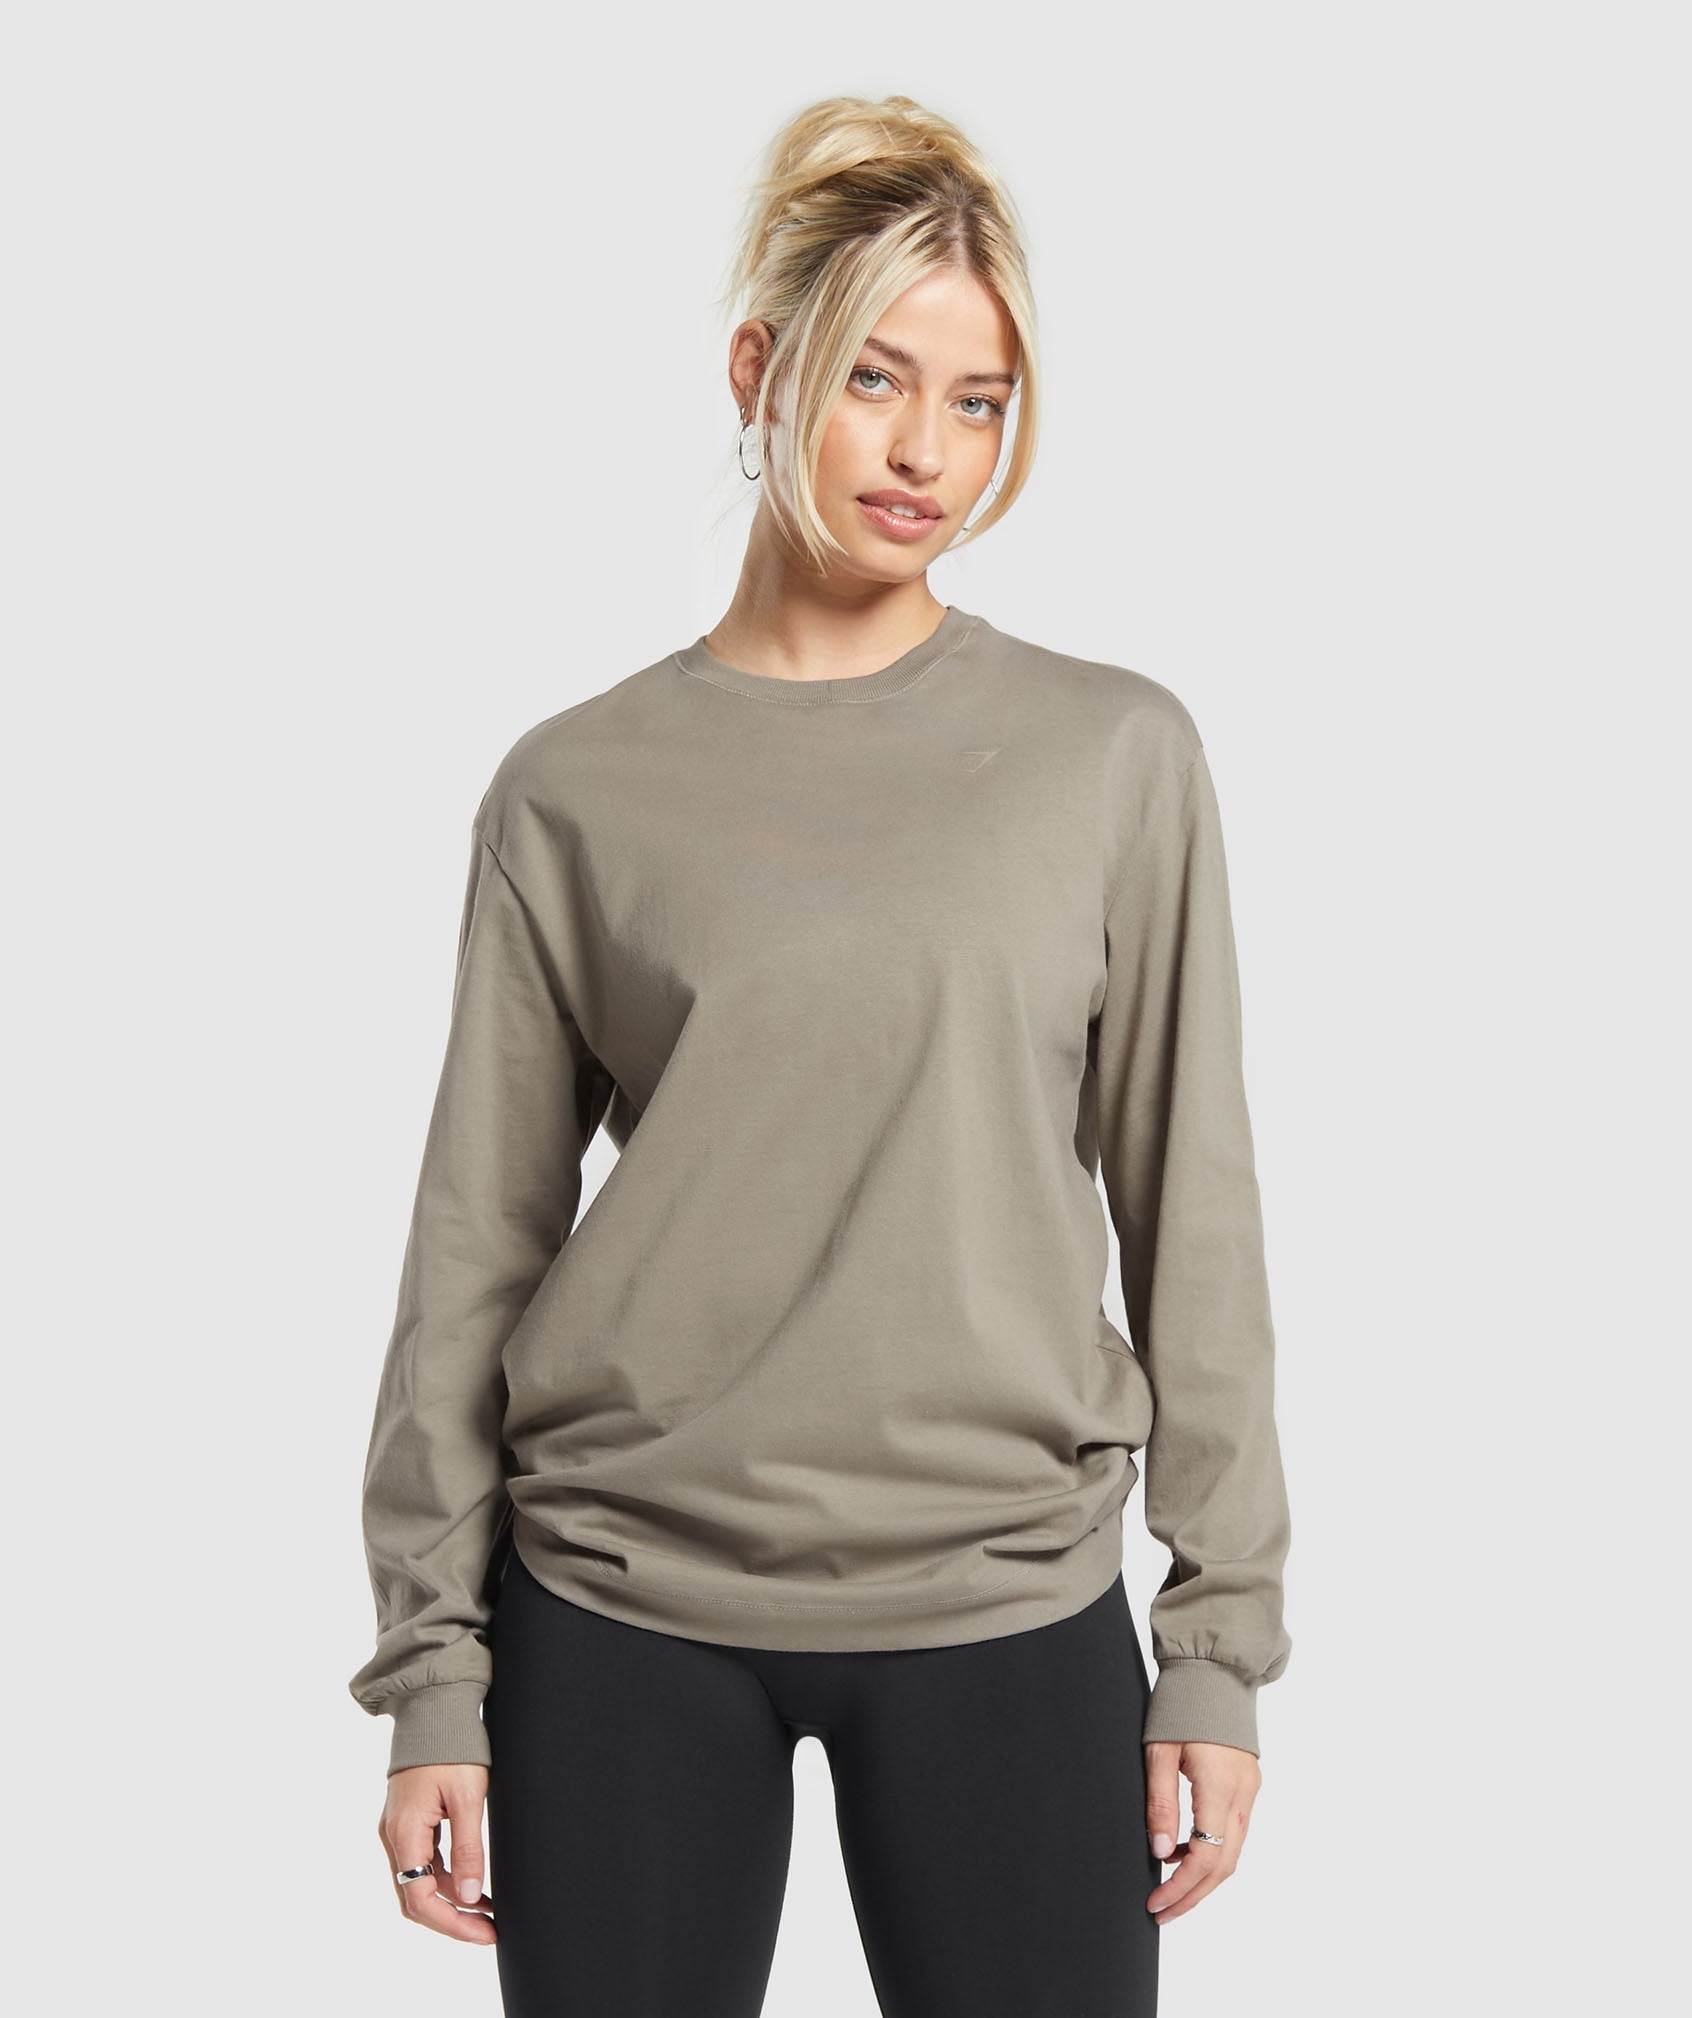 Cotton Oversized Long Sleeve Top in Linen Brown is out of stock